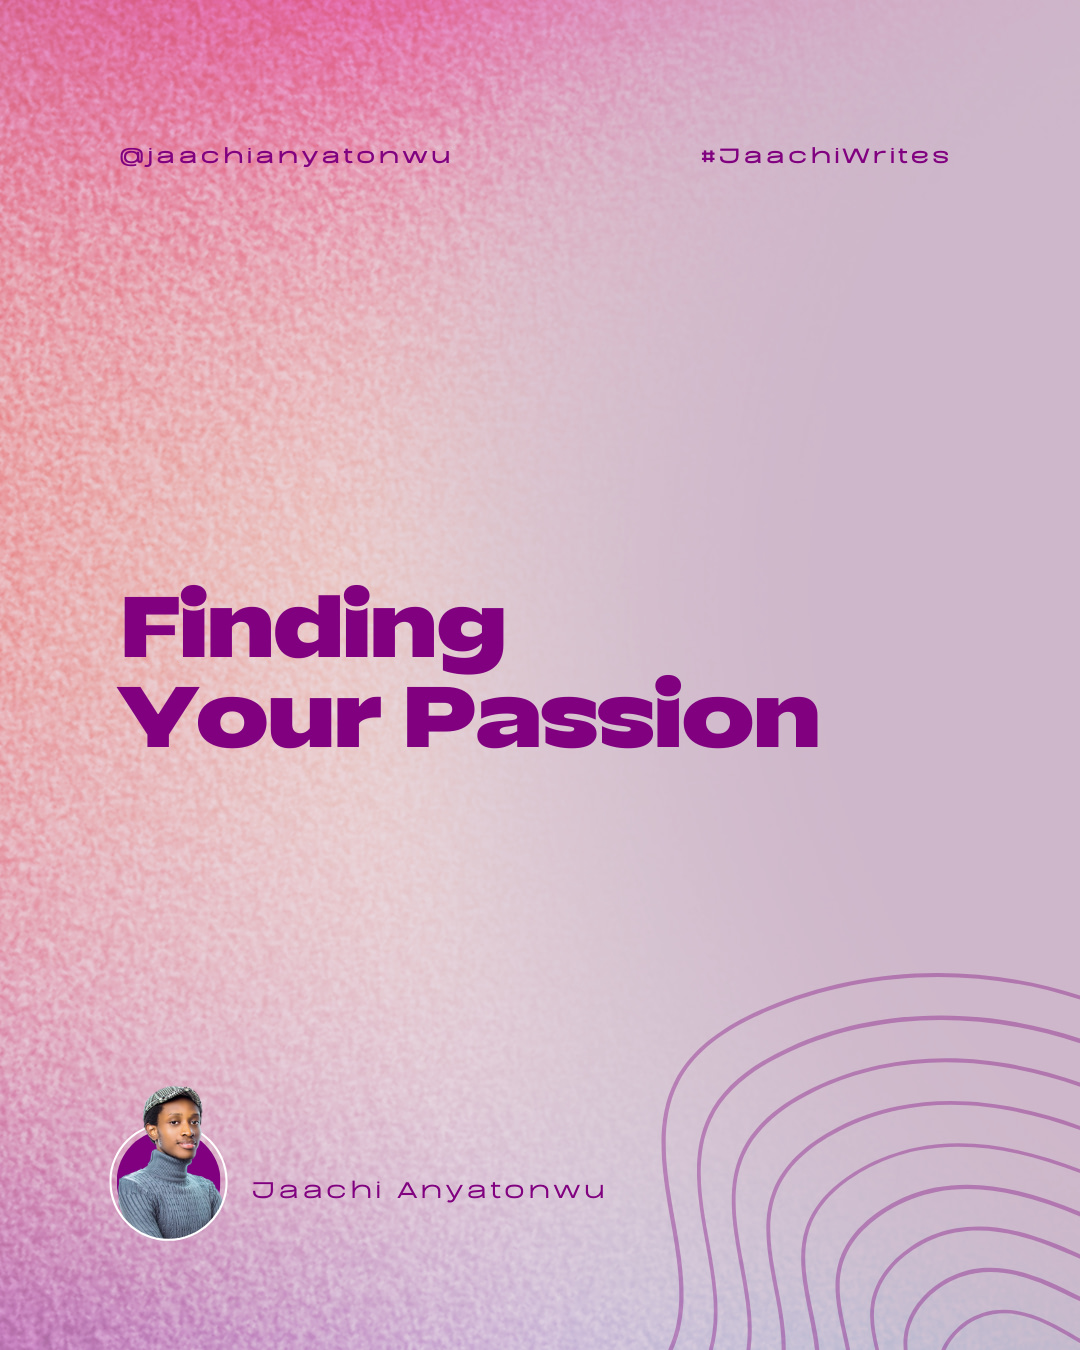 Finding Your Passion Is Paramount